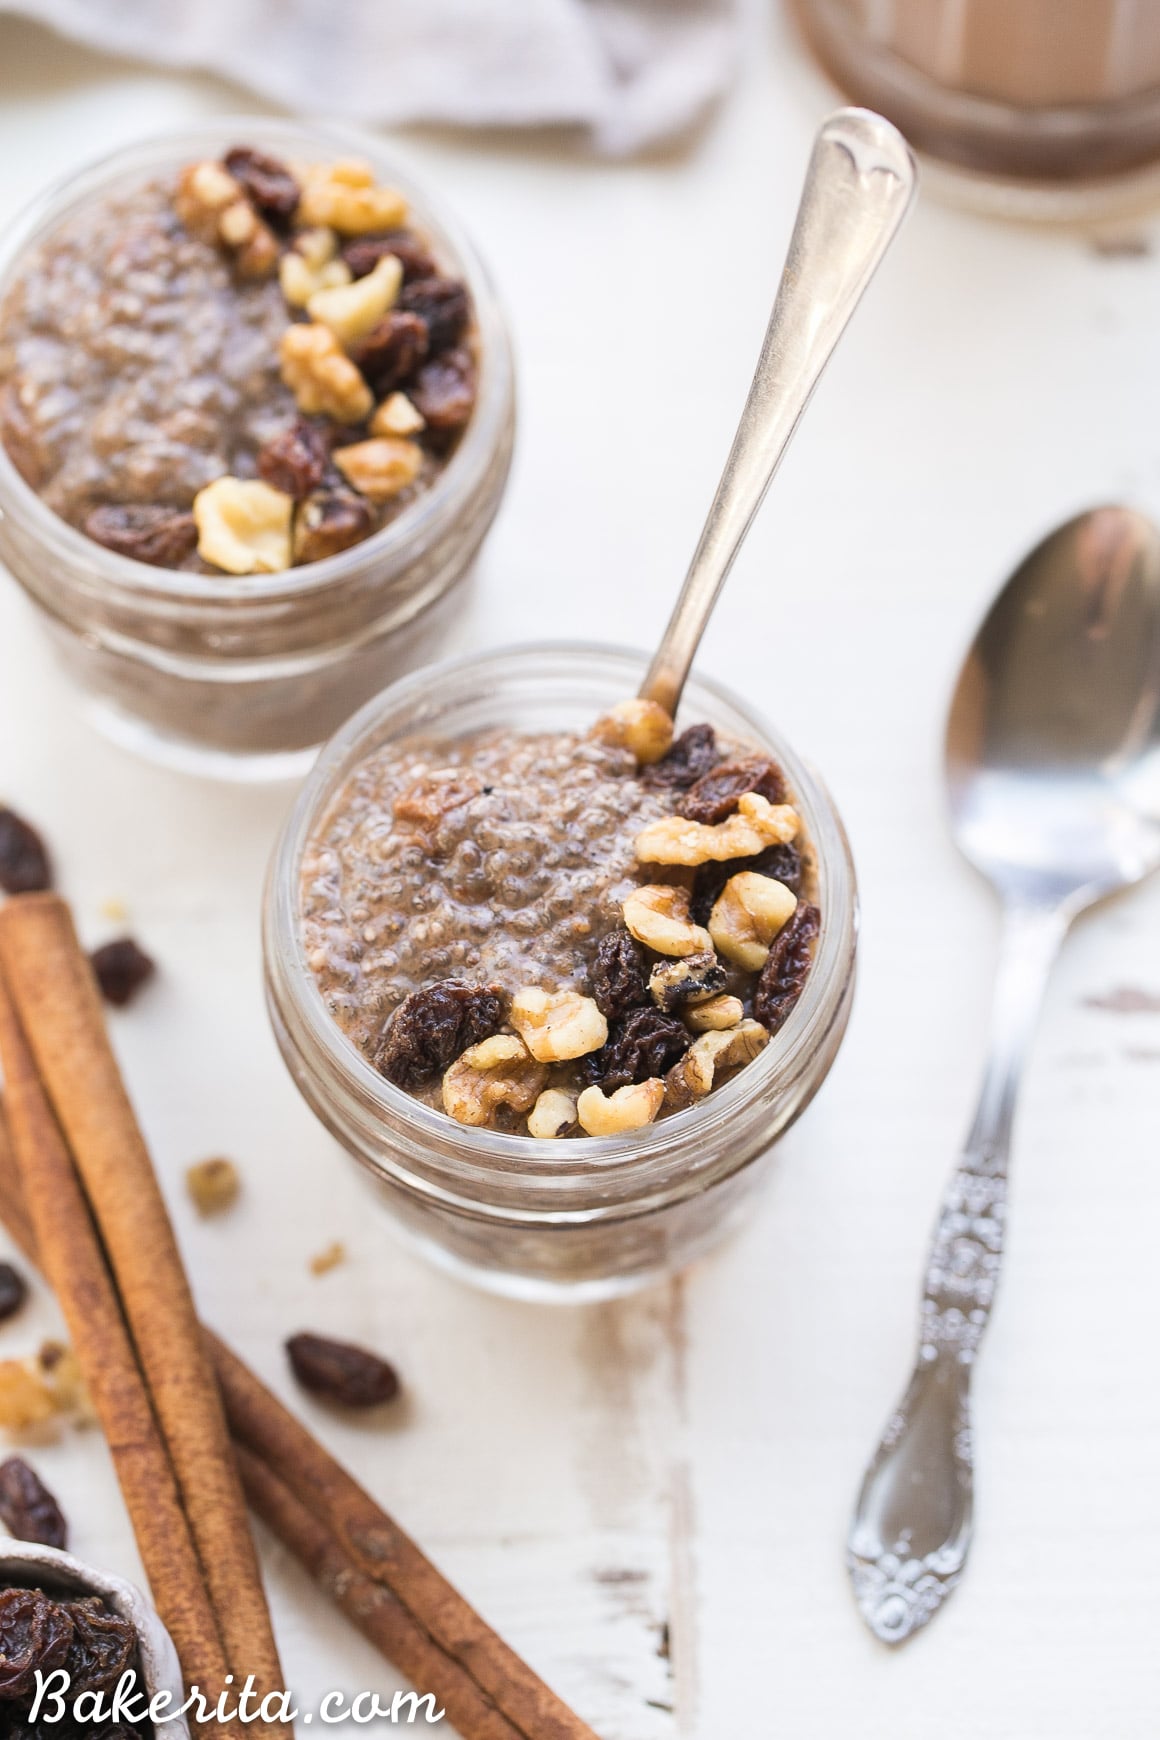 This Cinnamon Raisin Chia Pudding is an irresistibly delicious breakfast or snack made with only five ingredients and five minutes of prep. It's made with almond milk and naturally sweetened with dates, making it Paleo, vegan, and Whole30-compliant.